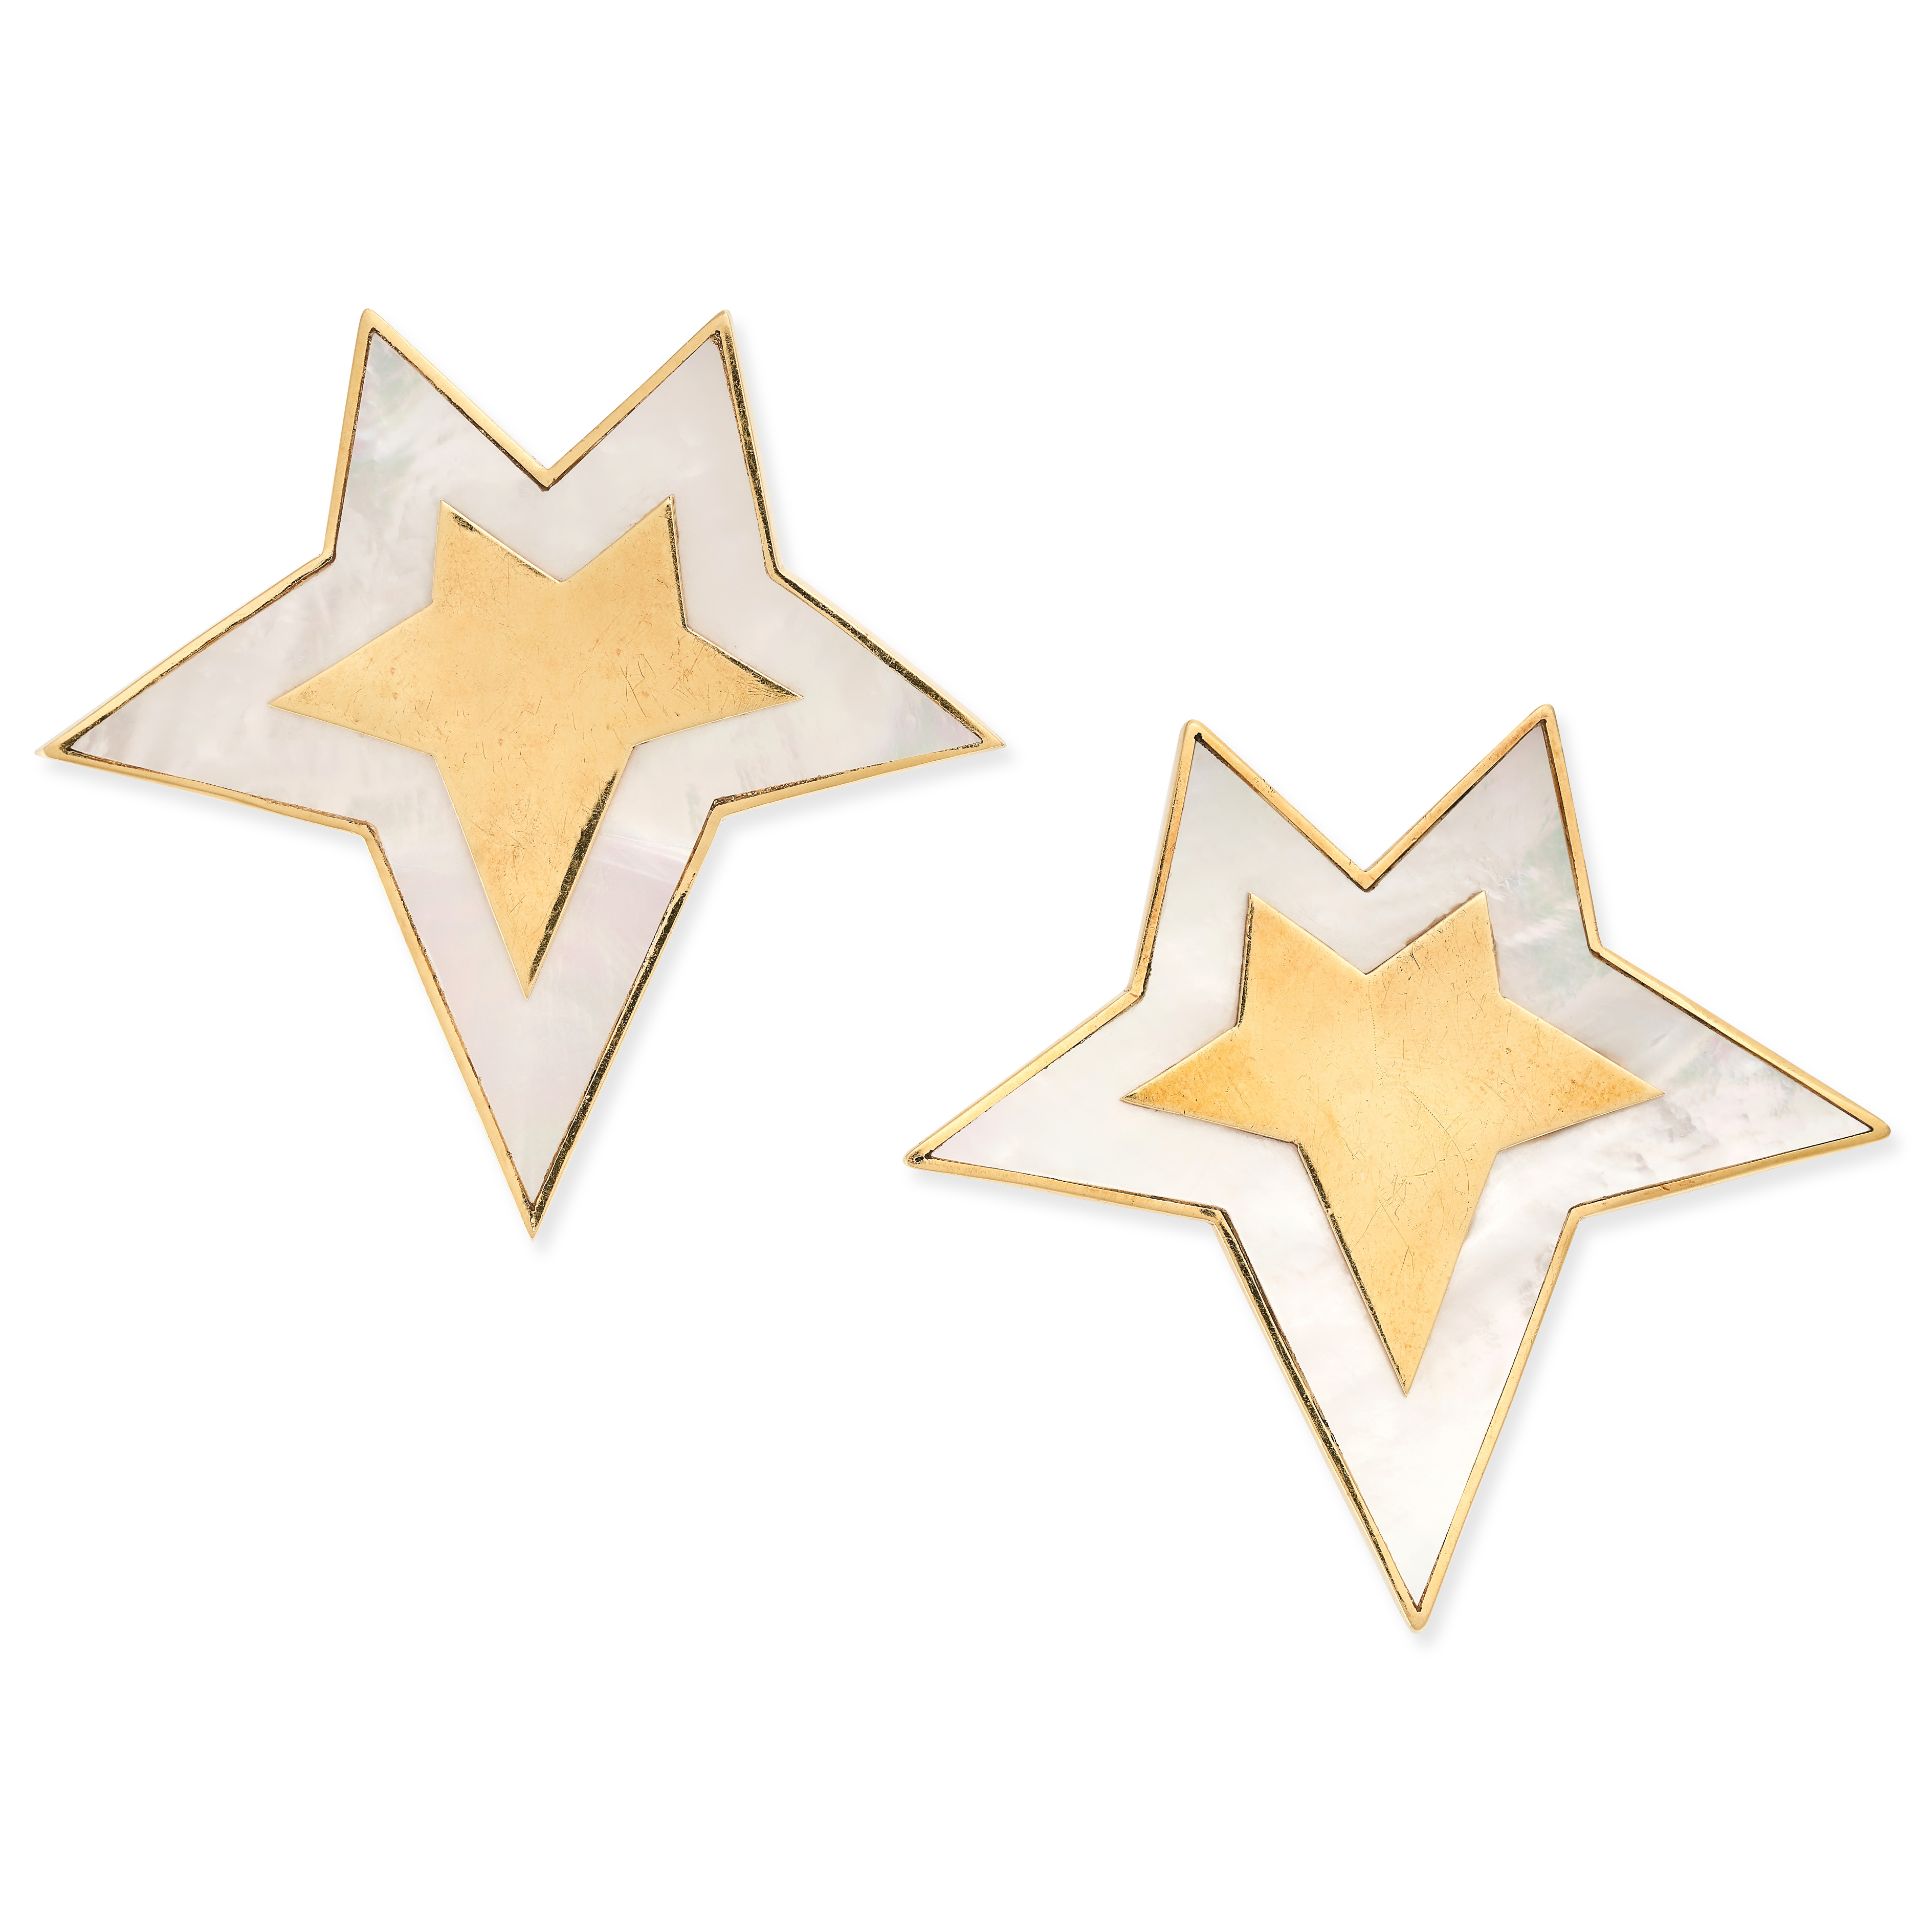 A PAIR OF MOTHER OF PEARL STAR CLIP EARRINGS in 18ct yellow gold, designed as an abstract star,